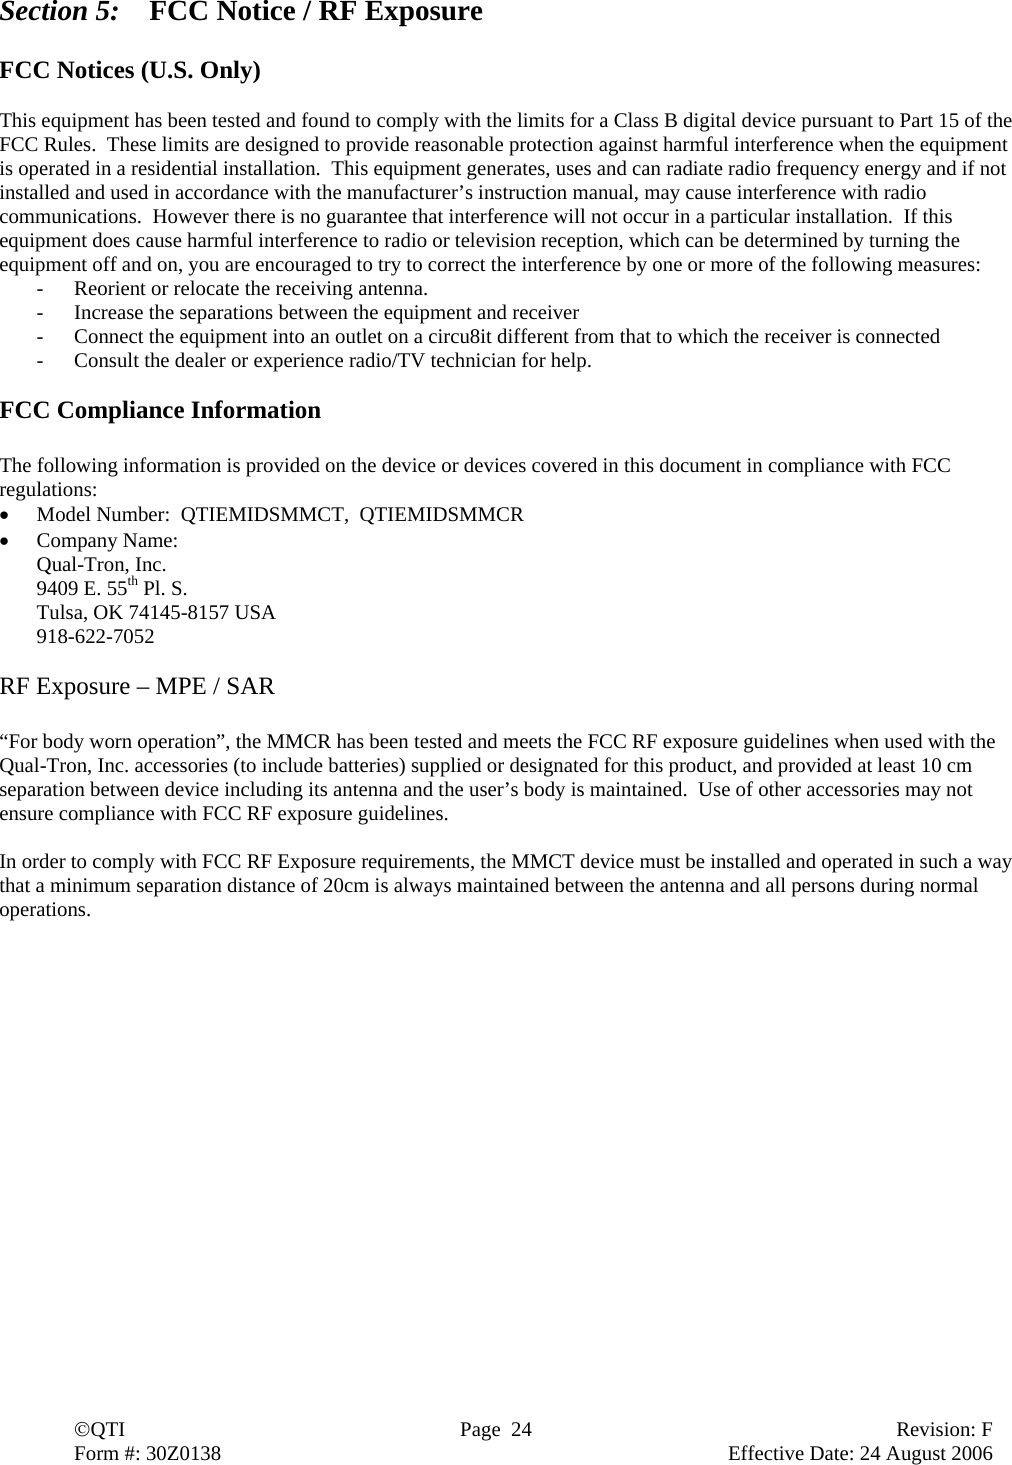  ©QTI  Page  24  Revision: F  Form #: 30Z0138        Effective Date: 24 August 2006 Section 5:  FCC Notice / RF Exposure  FCC Notices (U.S. Only)  This equipment has been tested and found to comply with the limits for a Class B digital device pursuant to Part 15 of the FCC Rules.  These limits are designed to provide reasonable protection against harmful interference when the equipment is operated in a residential installation.  This equipment generates, uses and can radiate radio frequency energy and if not installed and used in accordance with the manufacturer’s instruction manual, may cause interference with radio communications.  However there is no guarantee that interference will not occur in a particular installation.  If this equipment does cause harmful interference to radio or television reception, which can be determined by turning the equipment off and on, you are encouraged to try to correct the interference by one or more of the following measures: - Reorient or relocate the receiving antenna. - Increase the separations between the equipment and receiver - Connect the equipment into an outlet on a circu8it different from that to which the receiver is connected - Consult the dealer or experience radio/TV technician for help.  FCC Compliance Information  The following information is provided on the device or devices covered in this document in compliance with FCC regulations: • Model Number:  QTIEMIDSMMCT,  QTIEMIDSMMCR • Company Name:   Qual-Tron, Inc. 9409 E. 55th Pl. S. Tulsa, OK 74145-8157 USA 918-622-7052  RF Exposure – MPE / SAR  “For body worn operation”, the MMCR has been tested and meets the FCC RF exposure guidelines when used with the Qual-Tron, Inc. accessories (to include batteries) supplied or designated for this product, and provided at least 10 cm separation between device including its antenna and the user’s body is maintained.  Use of other accessories may not ensure compliance with FCC RF exposure guidelines.  In order to comply with FCC RF Exposure requirements, the MMCT device must be installed and operated in such a way that a minimum separation distance of 20cm is always maintained between the antenna and all persons during normal operations. 